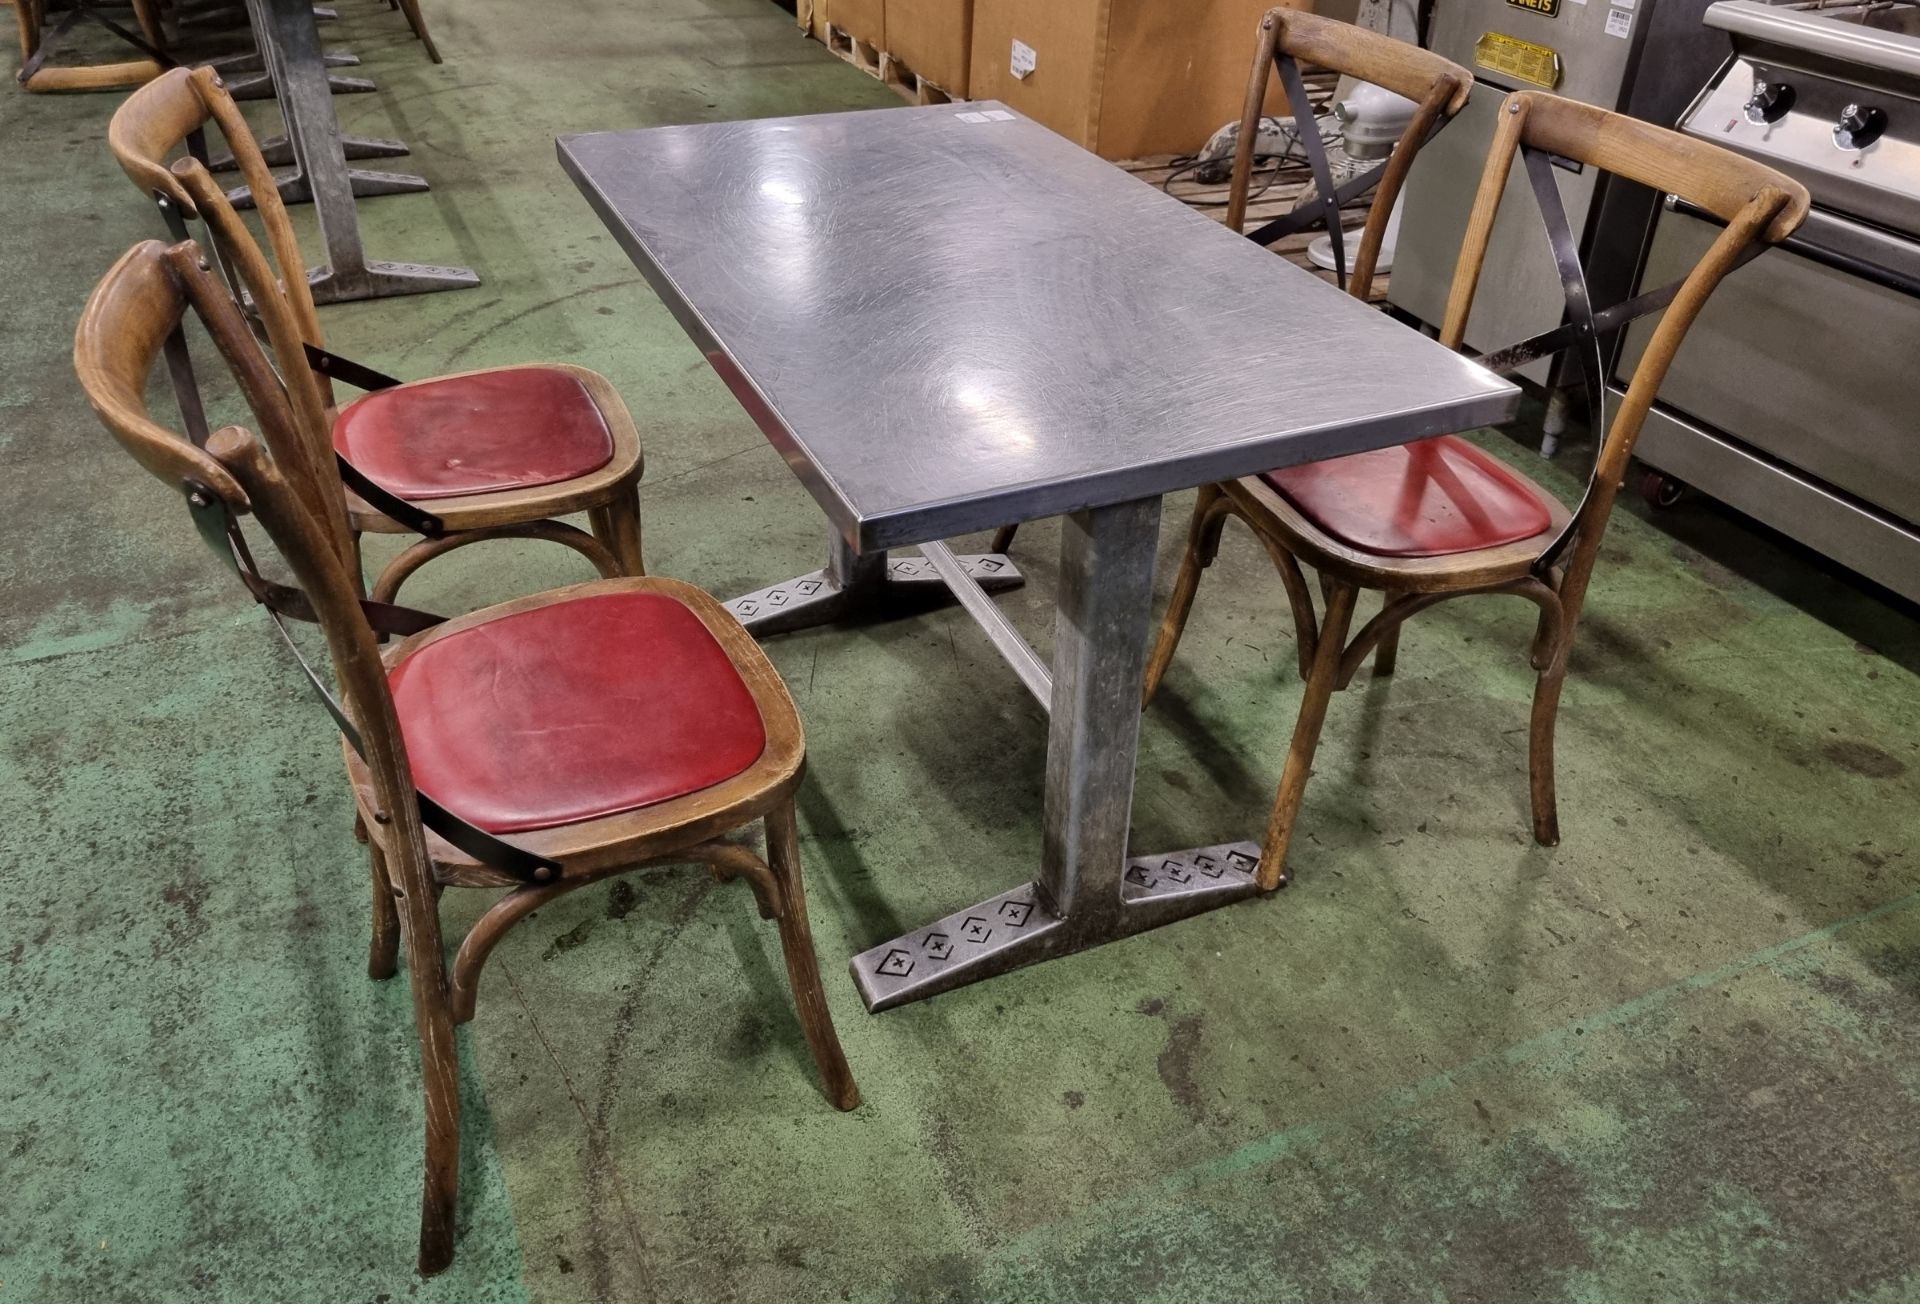 4x Wooden restaurant chairs, Metal table - W 1200 x D 690 x H 760 mm - Image 3 of 5